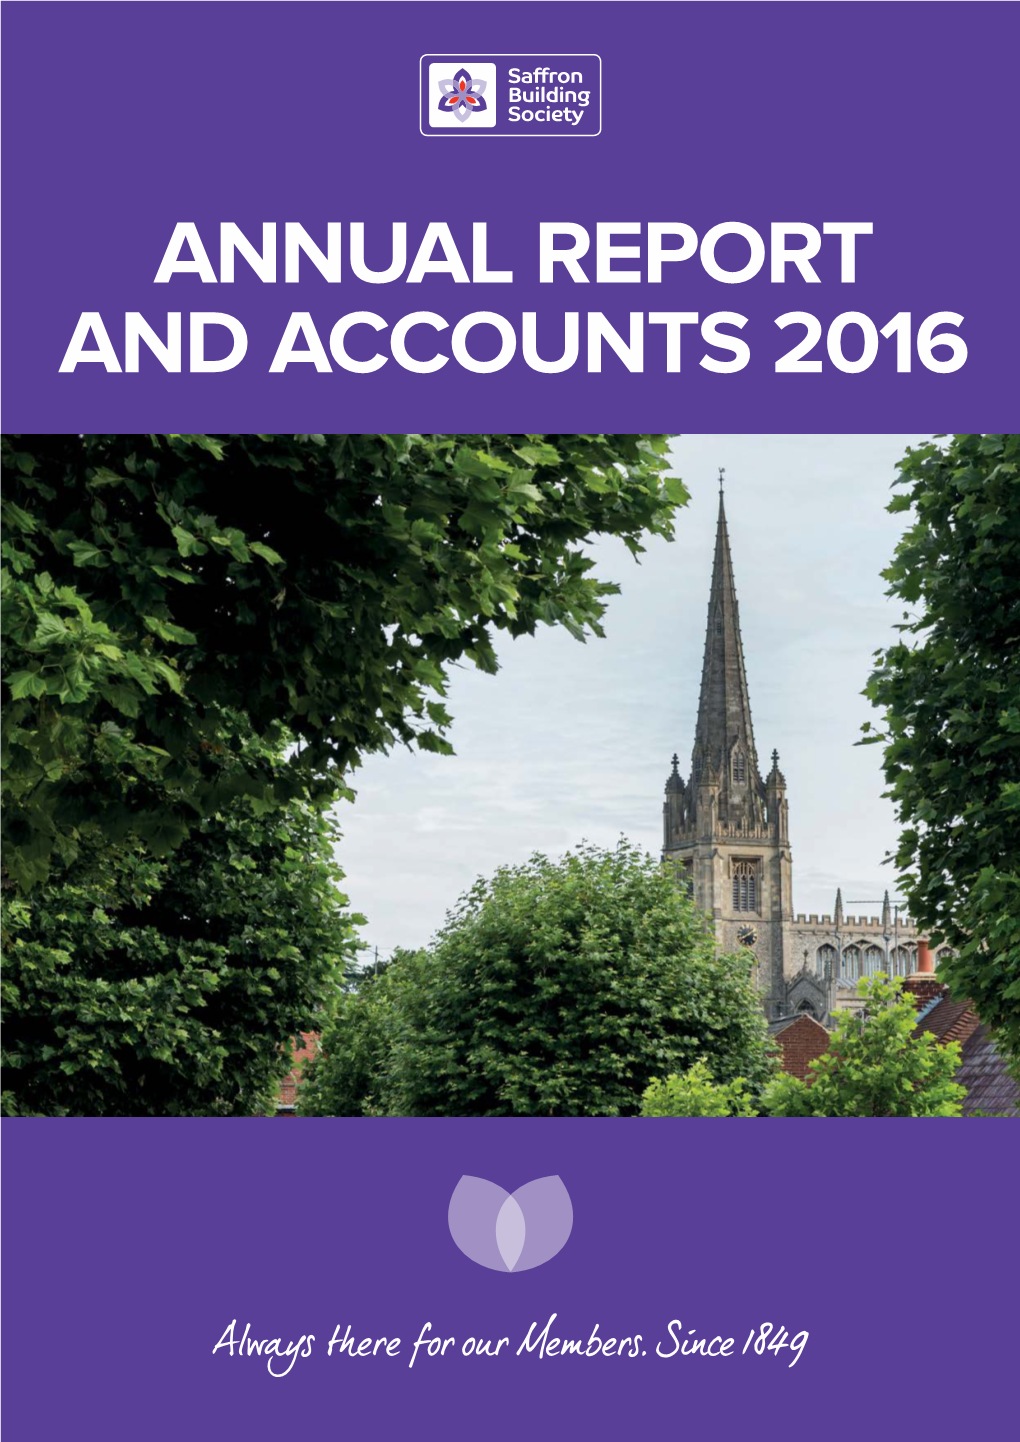 Annual Report and Accounts 2016 2 Annual Report and Accounts 2016 - Saffron Building Society Contents